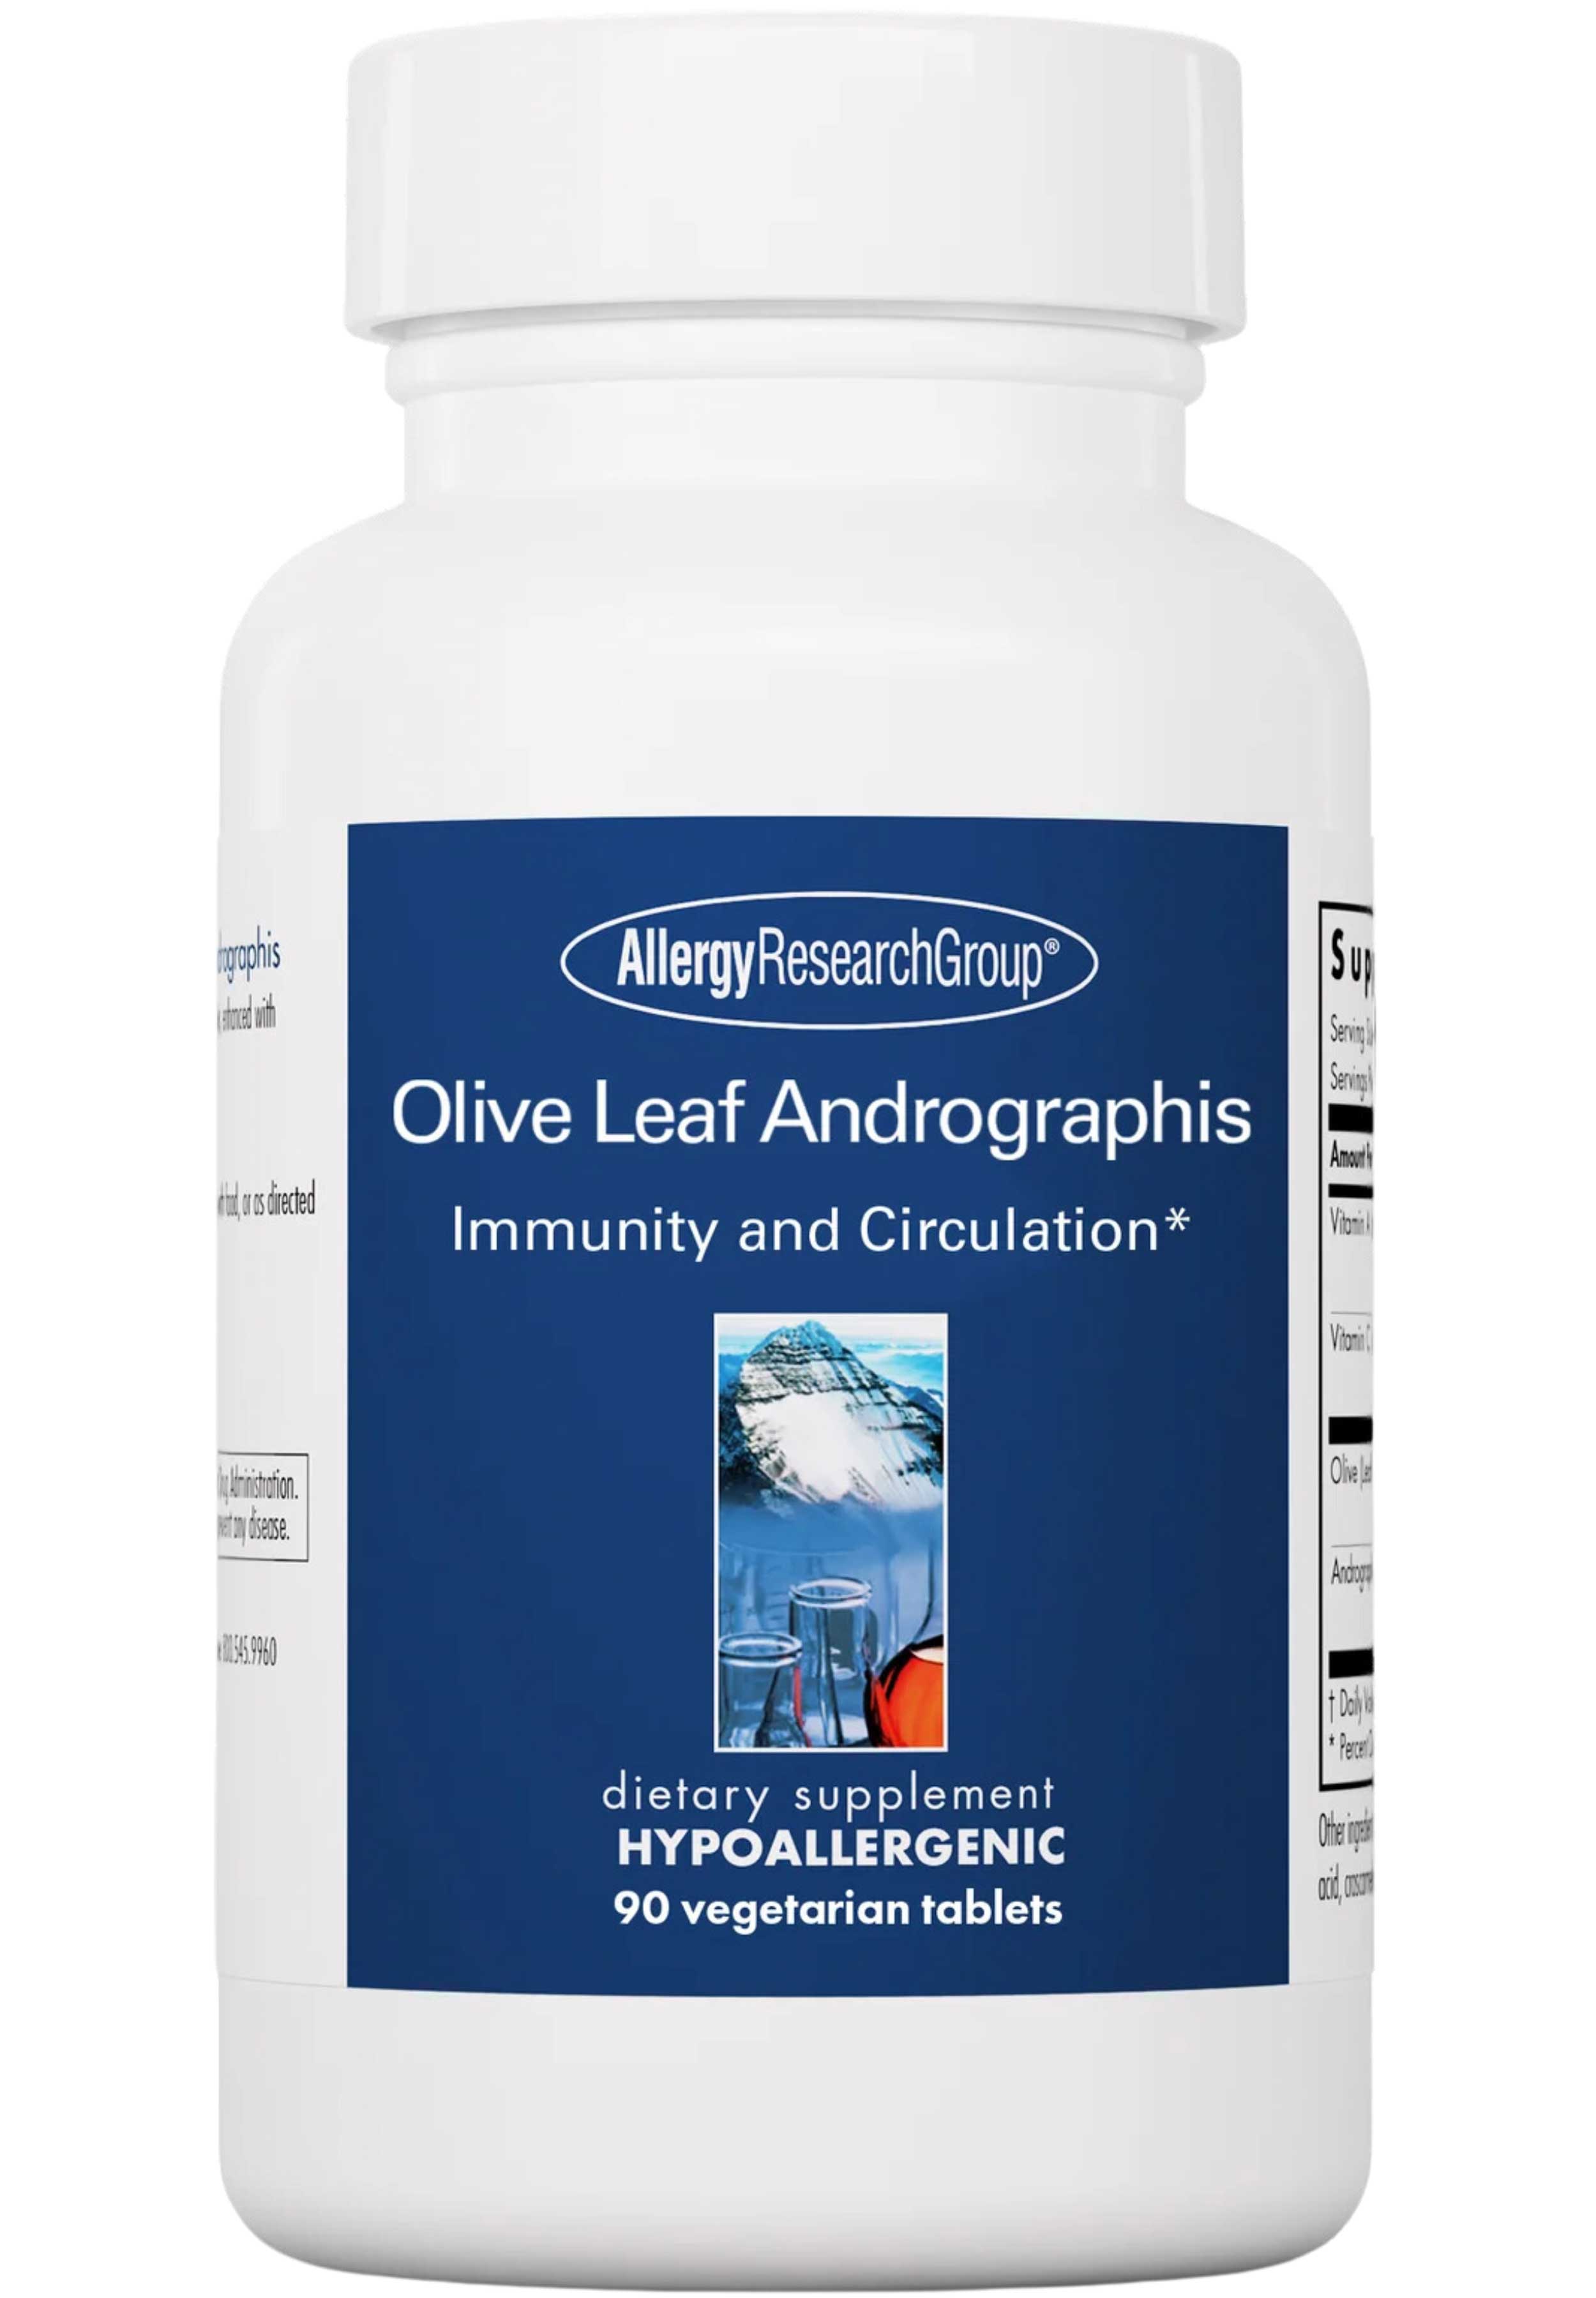 Allergy Research Group Olive Leaf Andrographis (Formerly Prolive)